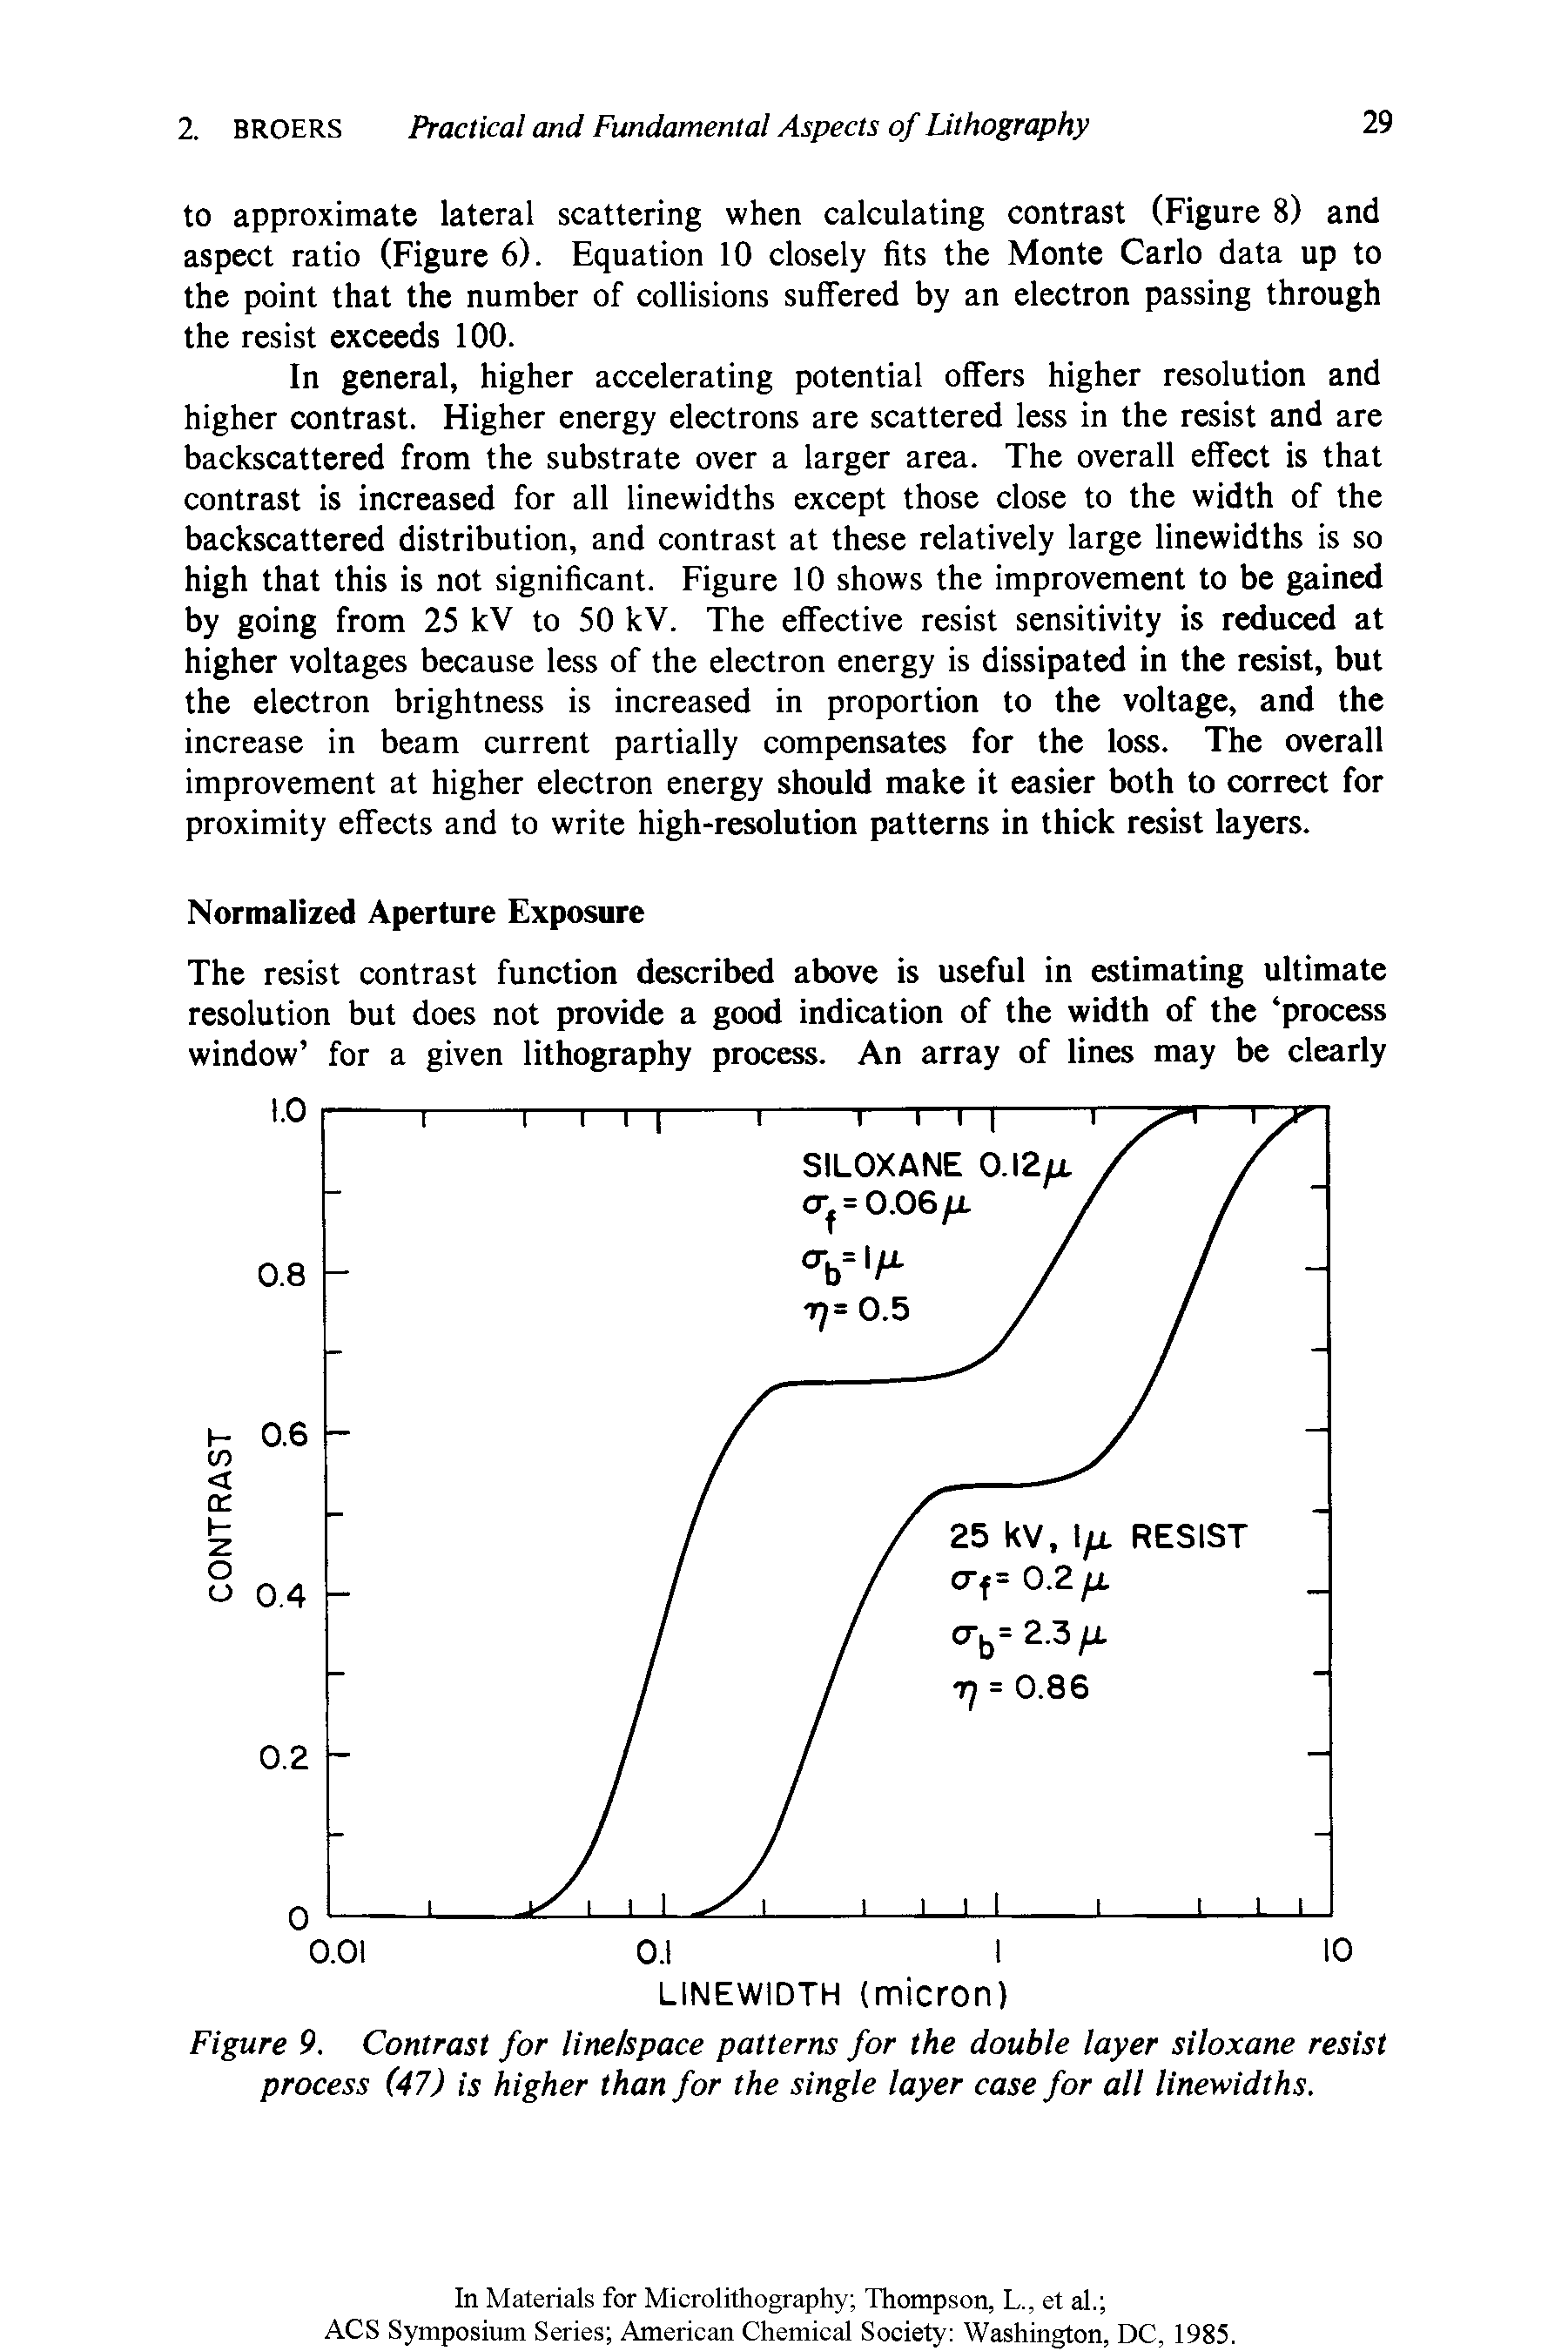 Figure 9. Contrast for lirte/space patterns for the double layer siloxane resist process (47) is higher than for the single layer case for all linewidths.